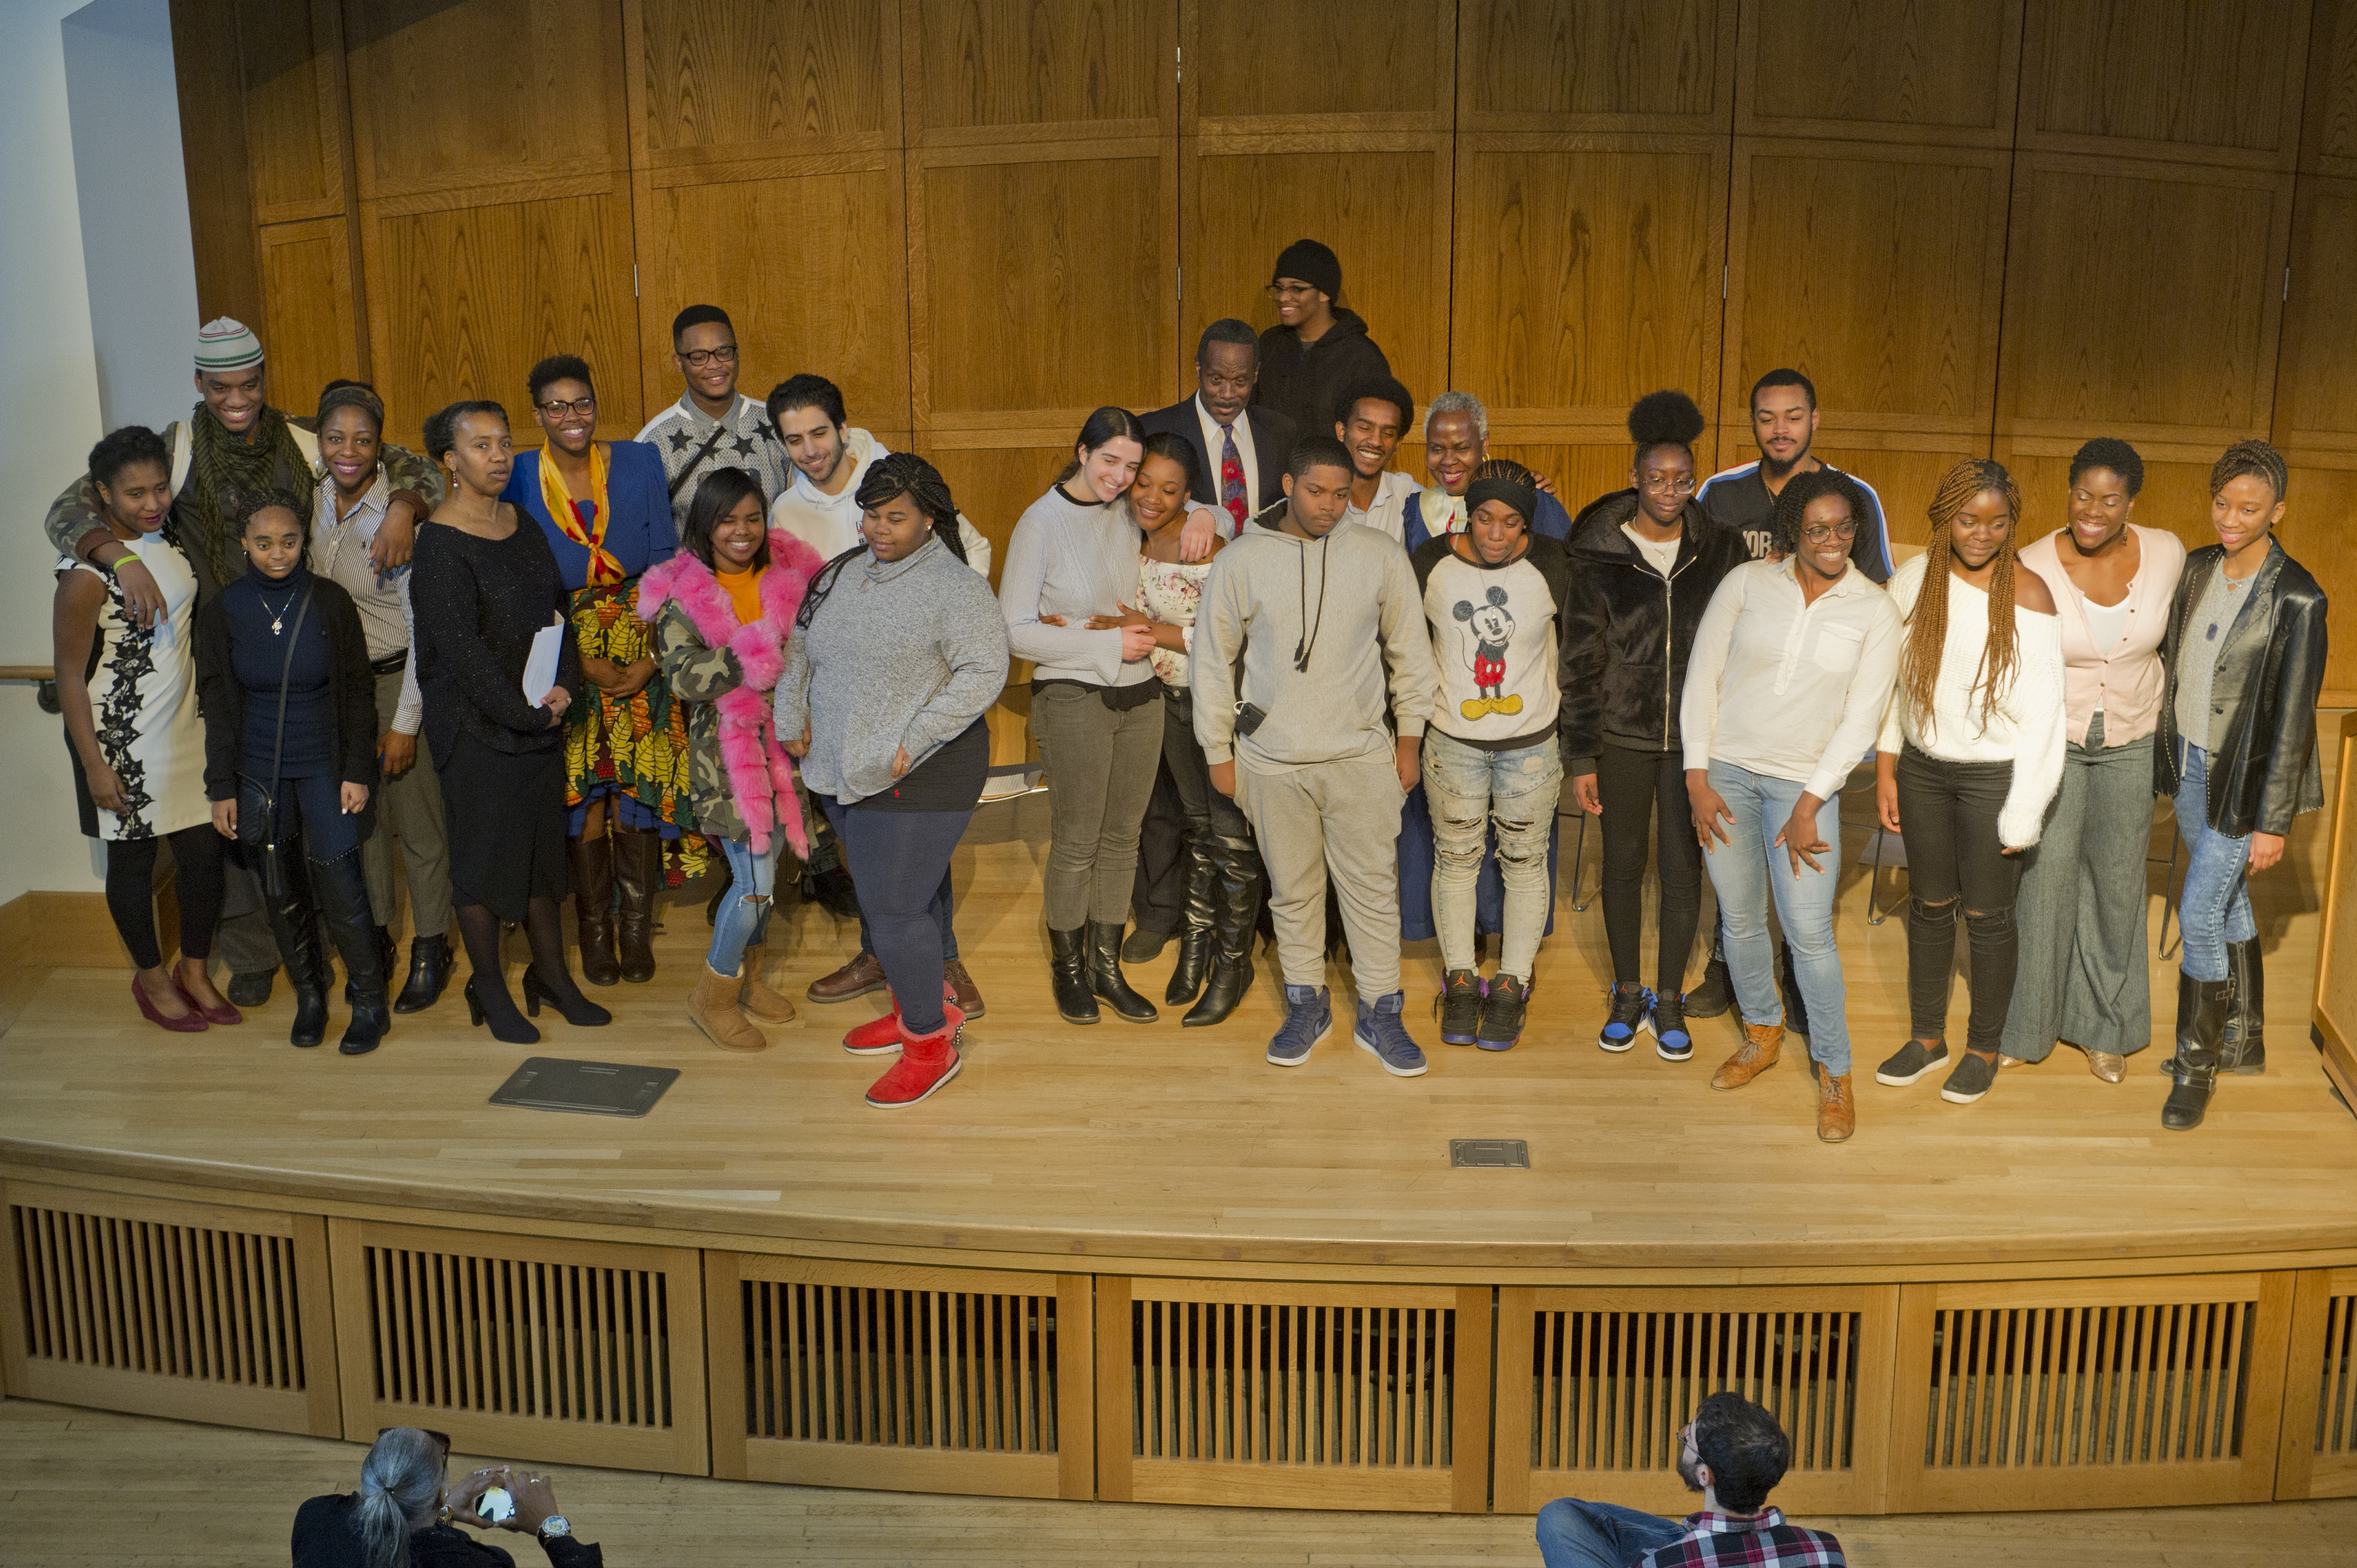 participants on stage at the Community Monologues performance